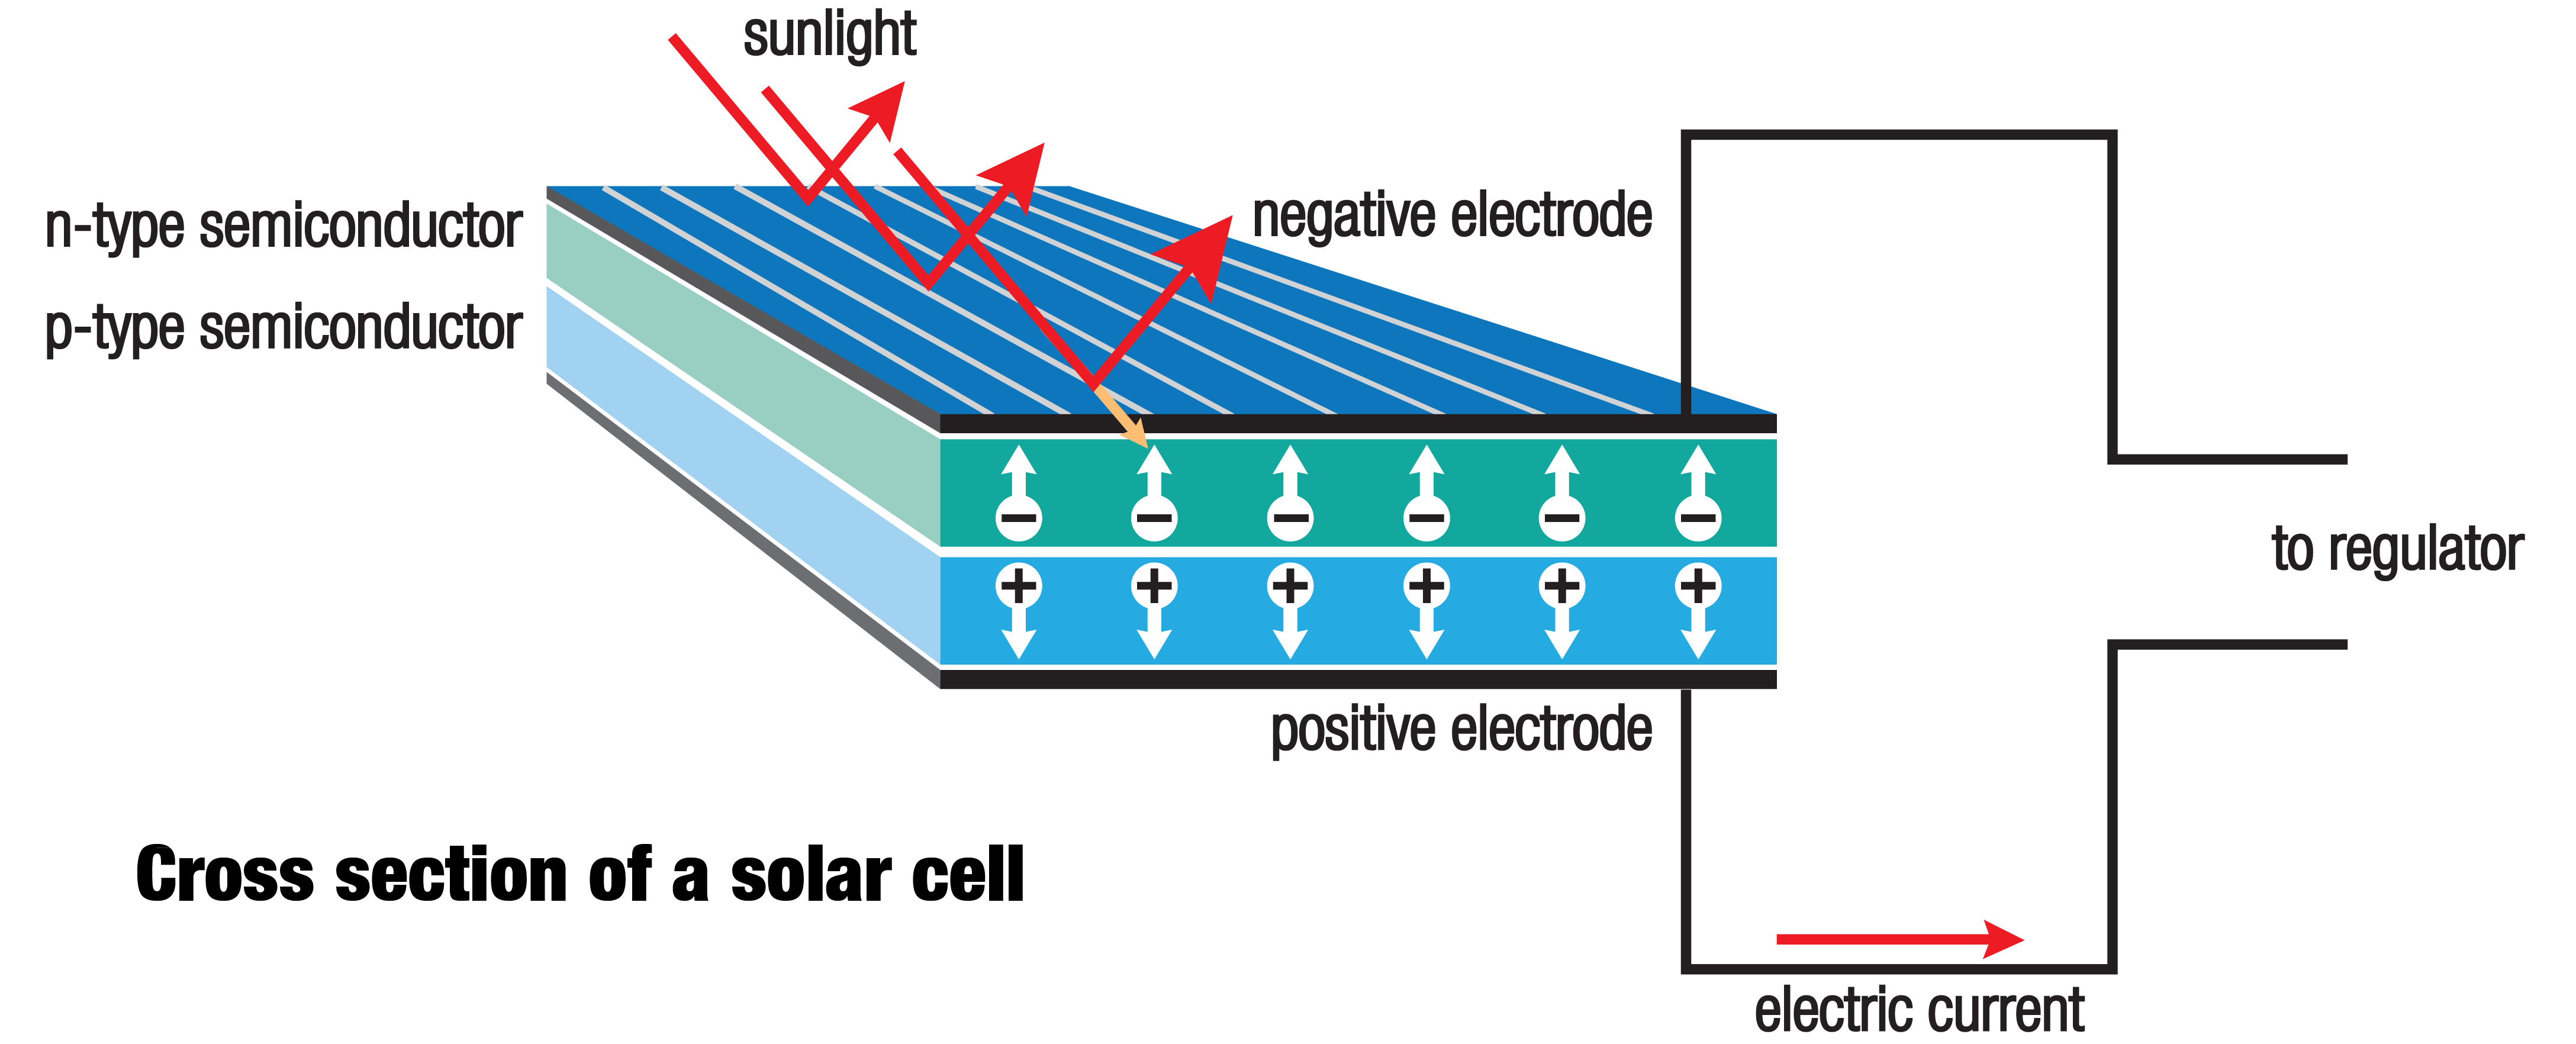 solar_cell.png  by Acef Ebrahimi